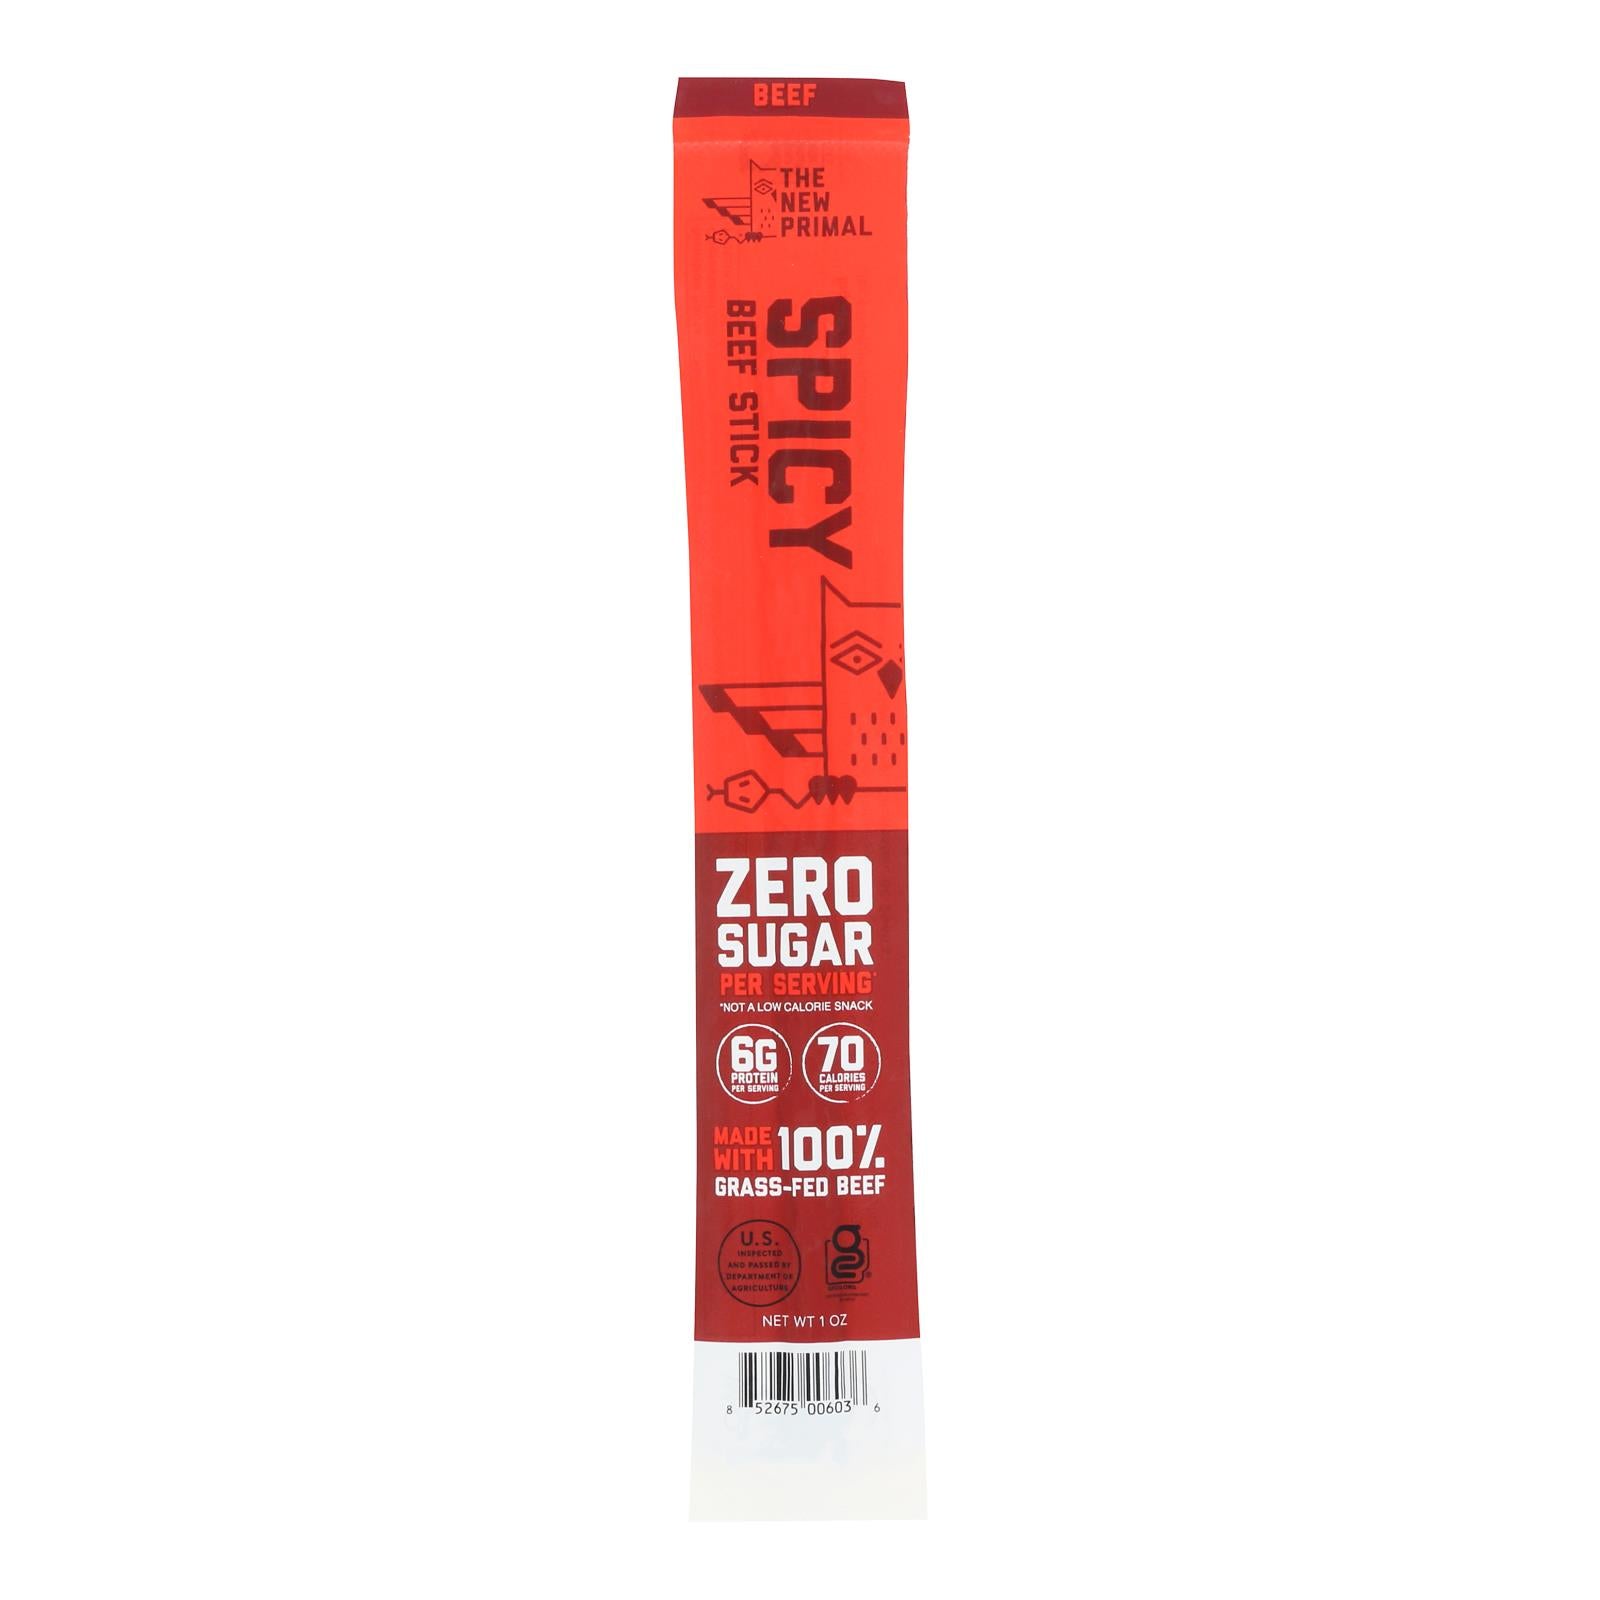 The New Primal Beef Sticks - Spicy - Case Of 20 - 1 Oz.